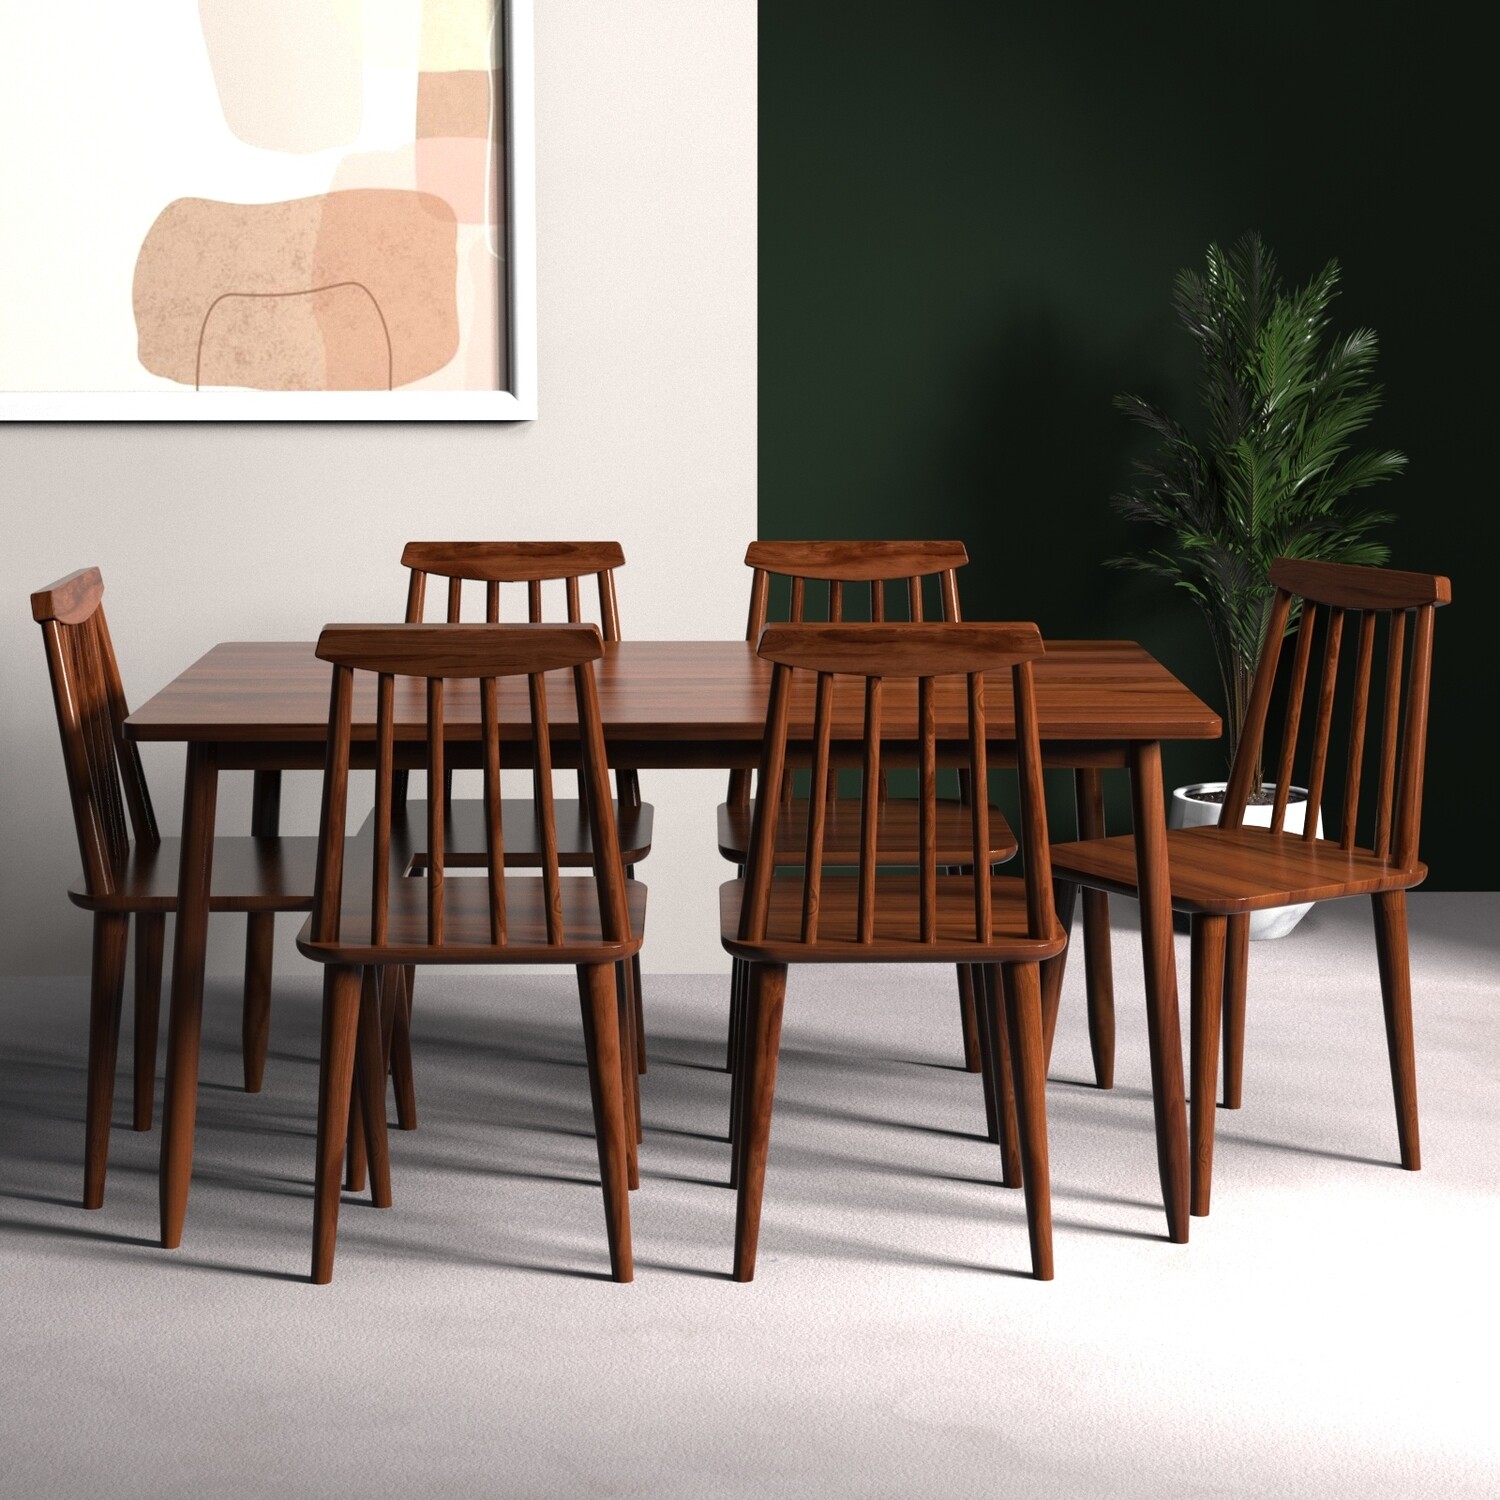 Maltby Dining Table Set - 6 Seater/150 cm